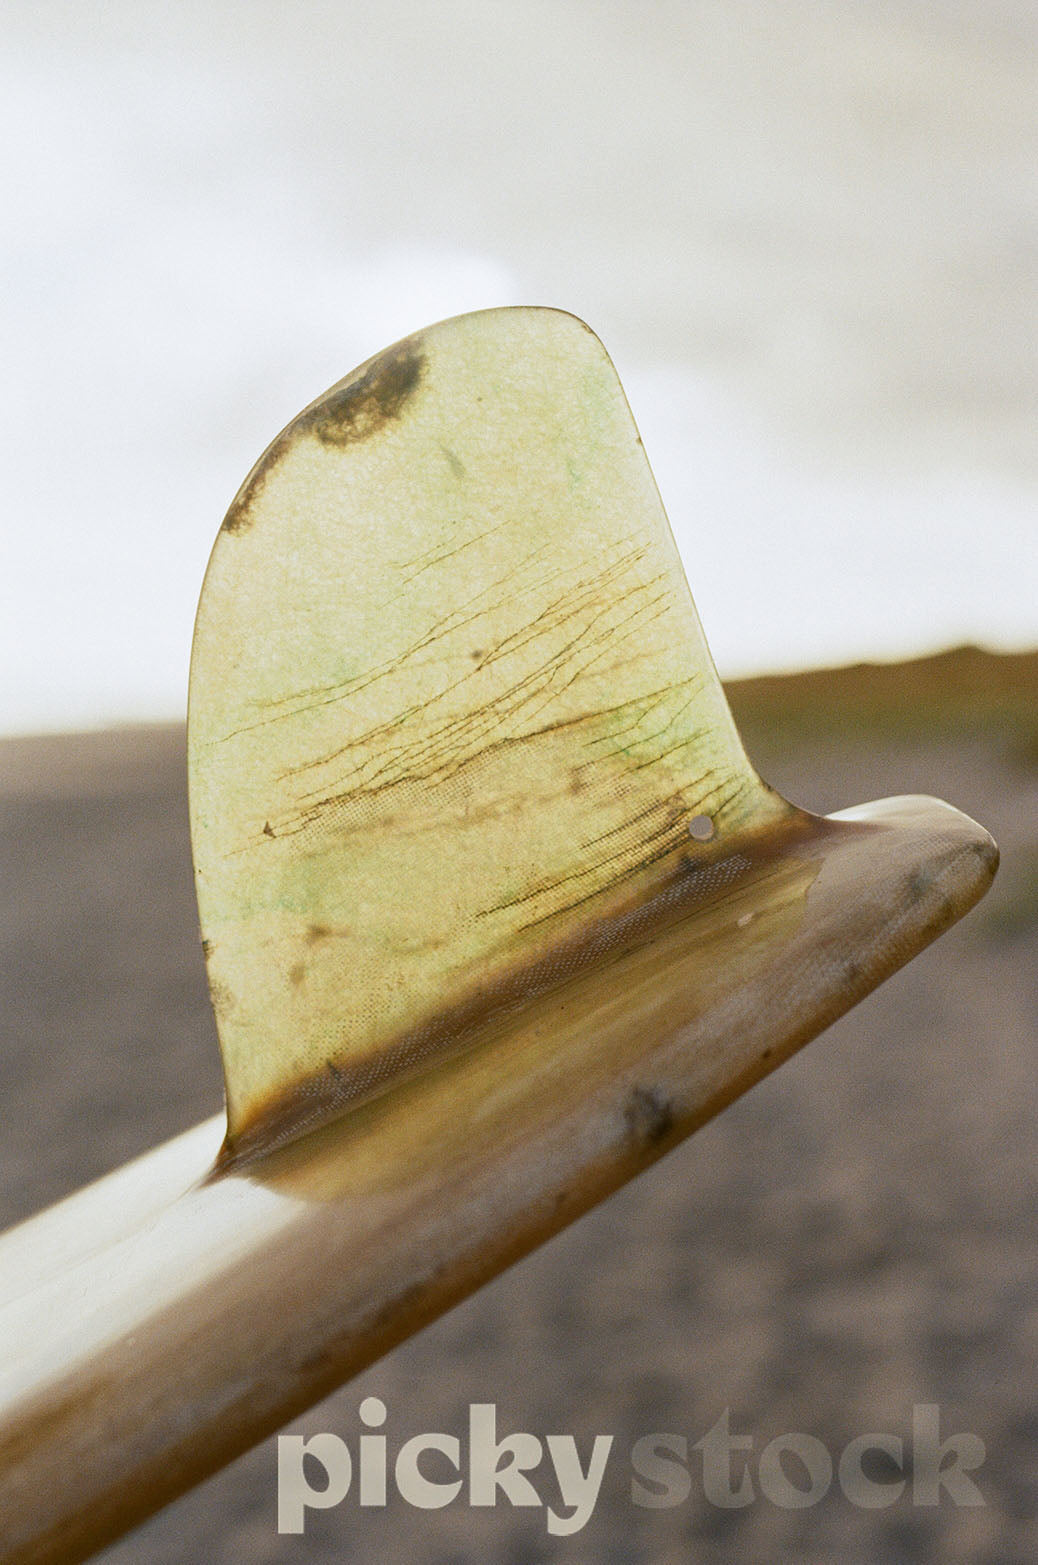 Close up image of surf board wide tail. Scratches and small marks are visible on the tail. Background is blown out sand and sjy